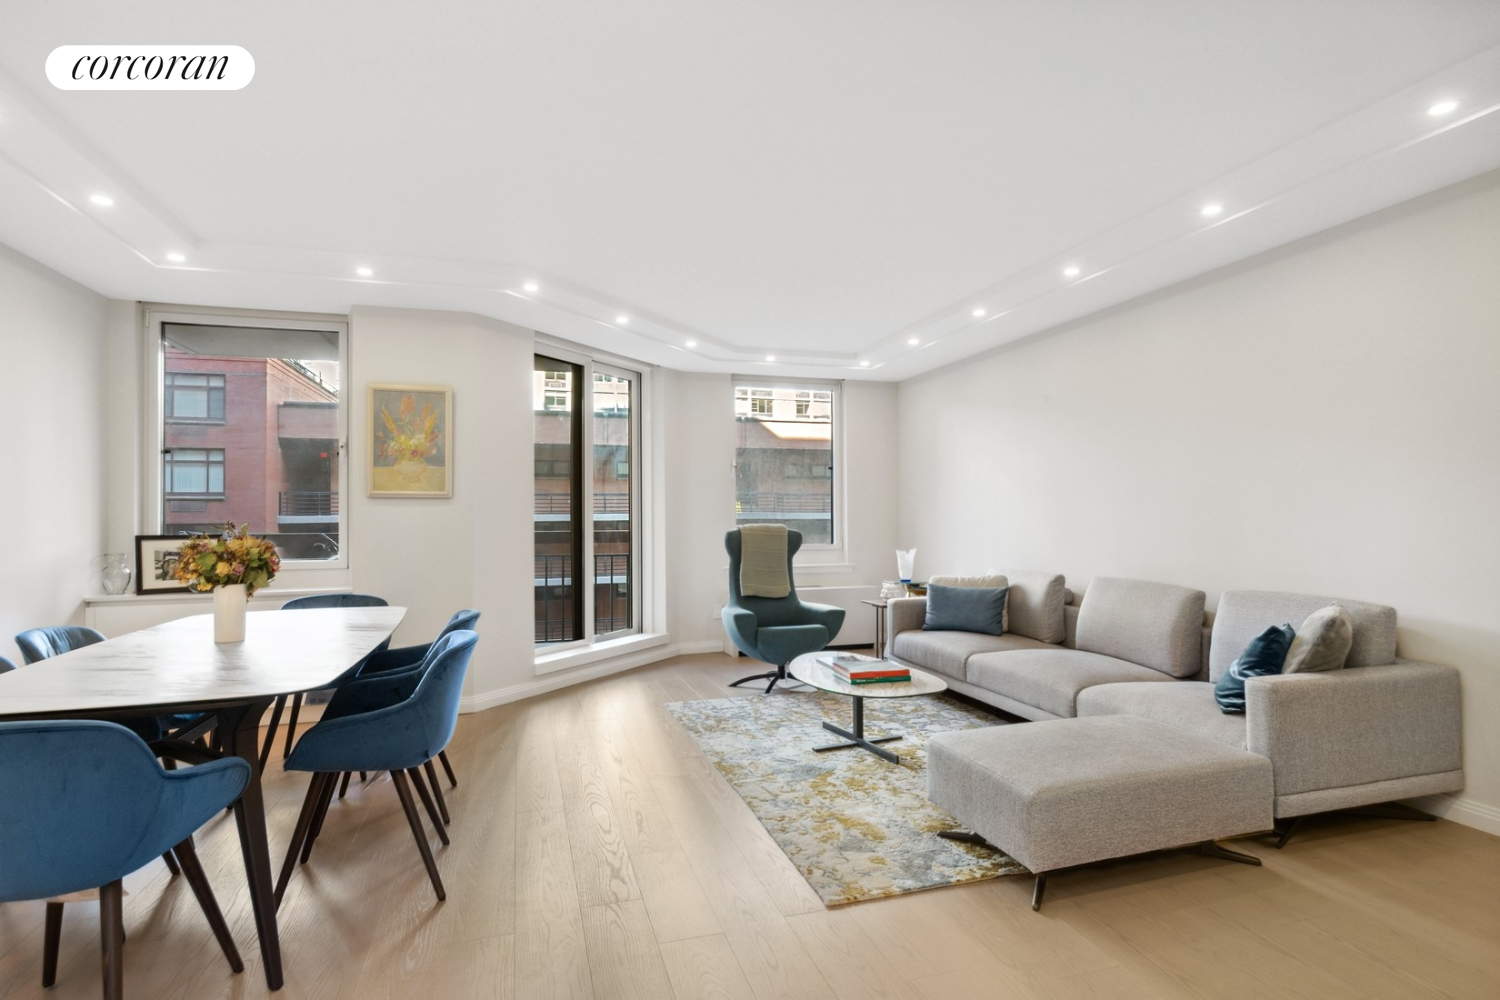 333 Rector Place 510, Battery Park City, Downtown, NYC - 2 Bedrooms  
2 Bathrooms  
3 Rooms - 